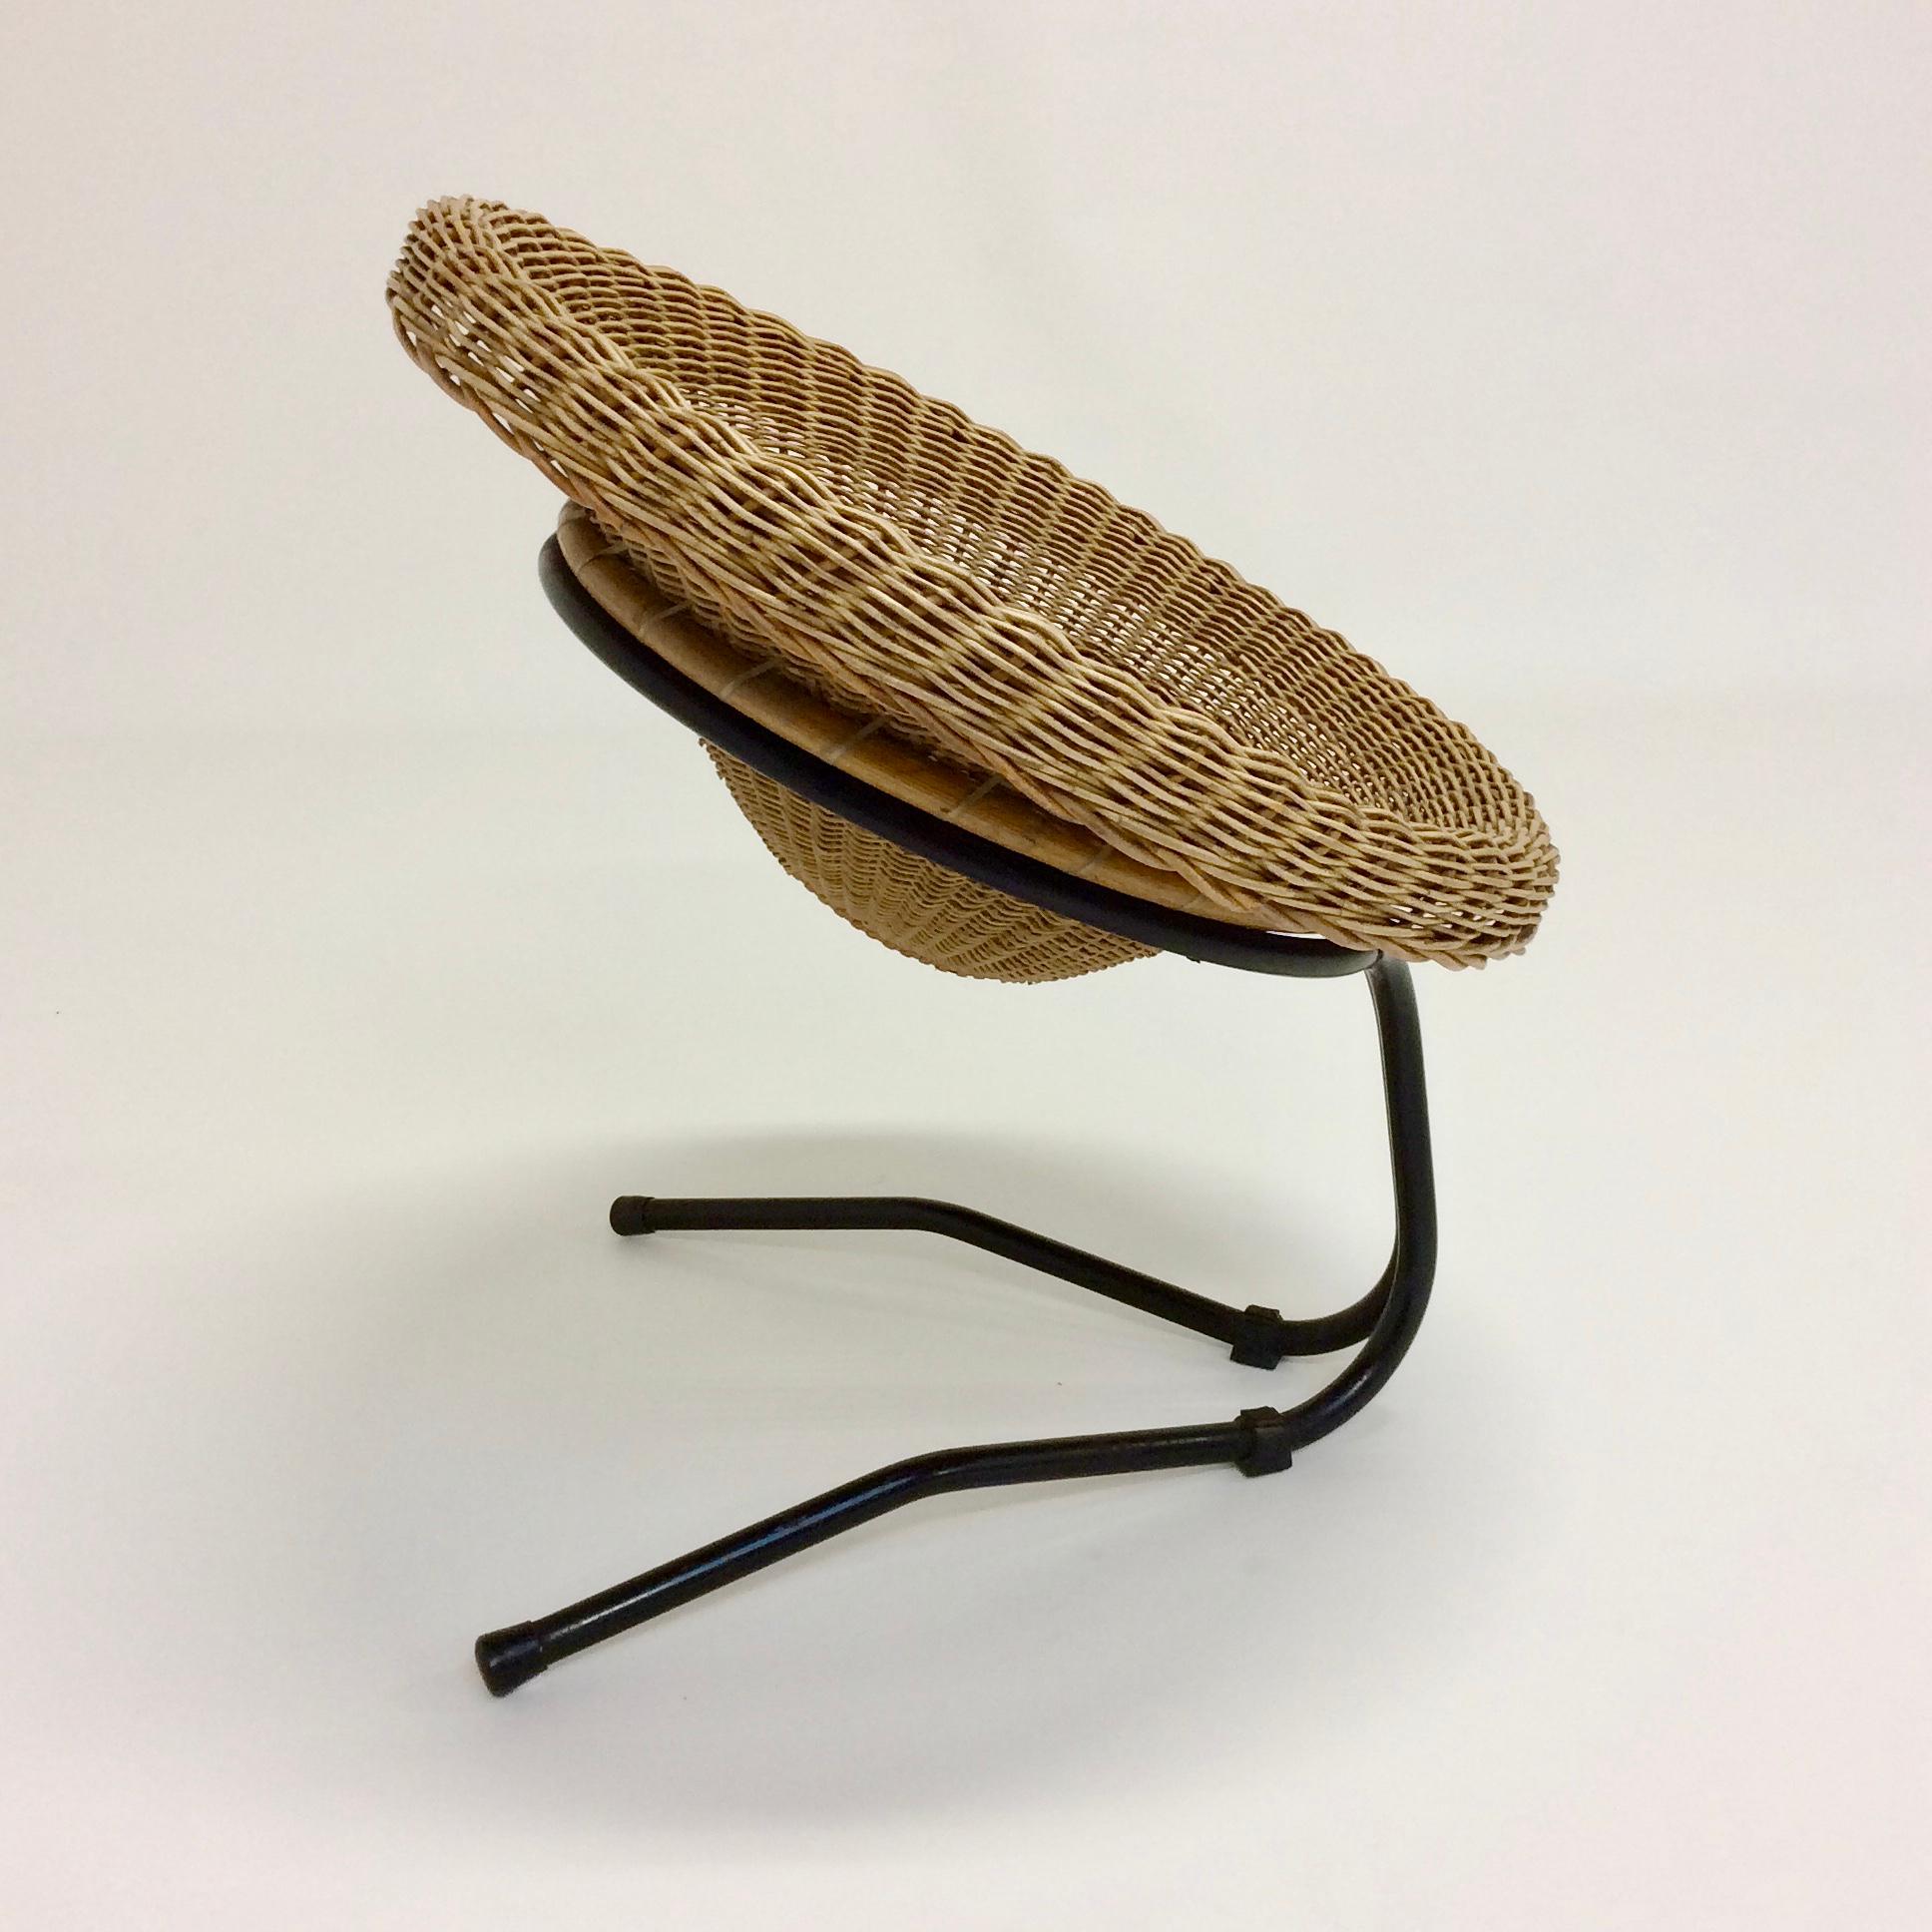 Nice rattan and bamboo armchair, Italy, circa 1960.
Black enameled steel base, rubbers.
Dimensions: 78 cm W, 68 cm D, 78 cm H, seat height 42 cm.
Good original condition.
All purchases are covered by our Buyer Protection Guarantee.
This item can be